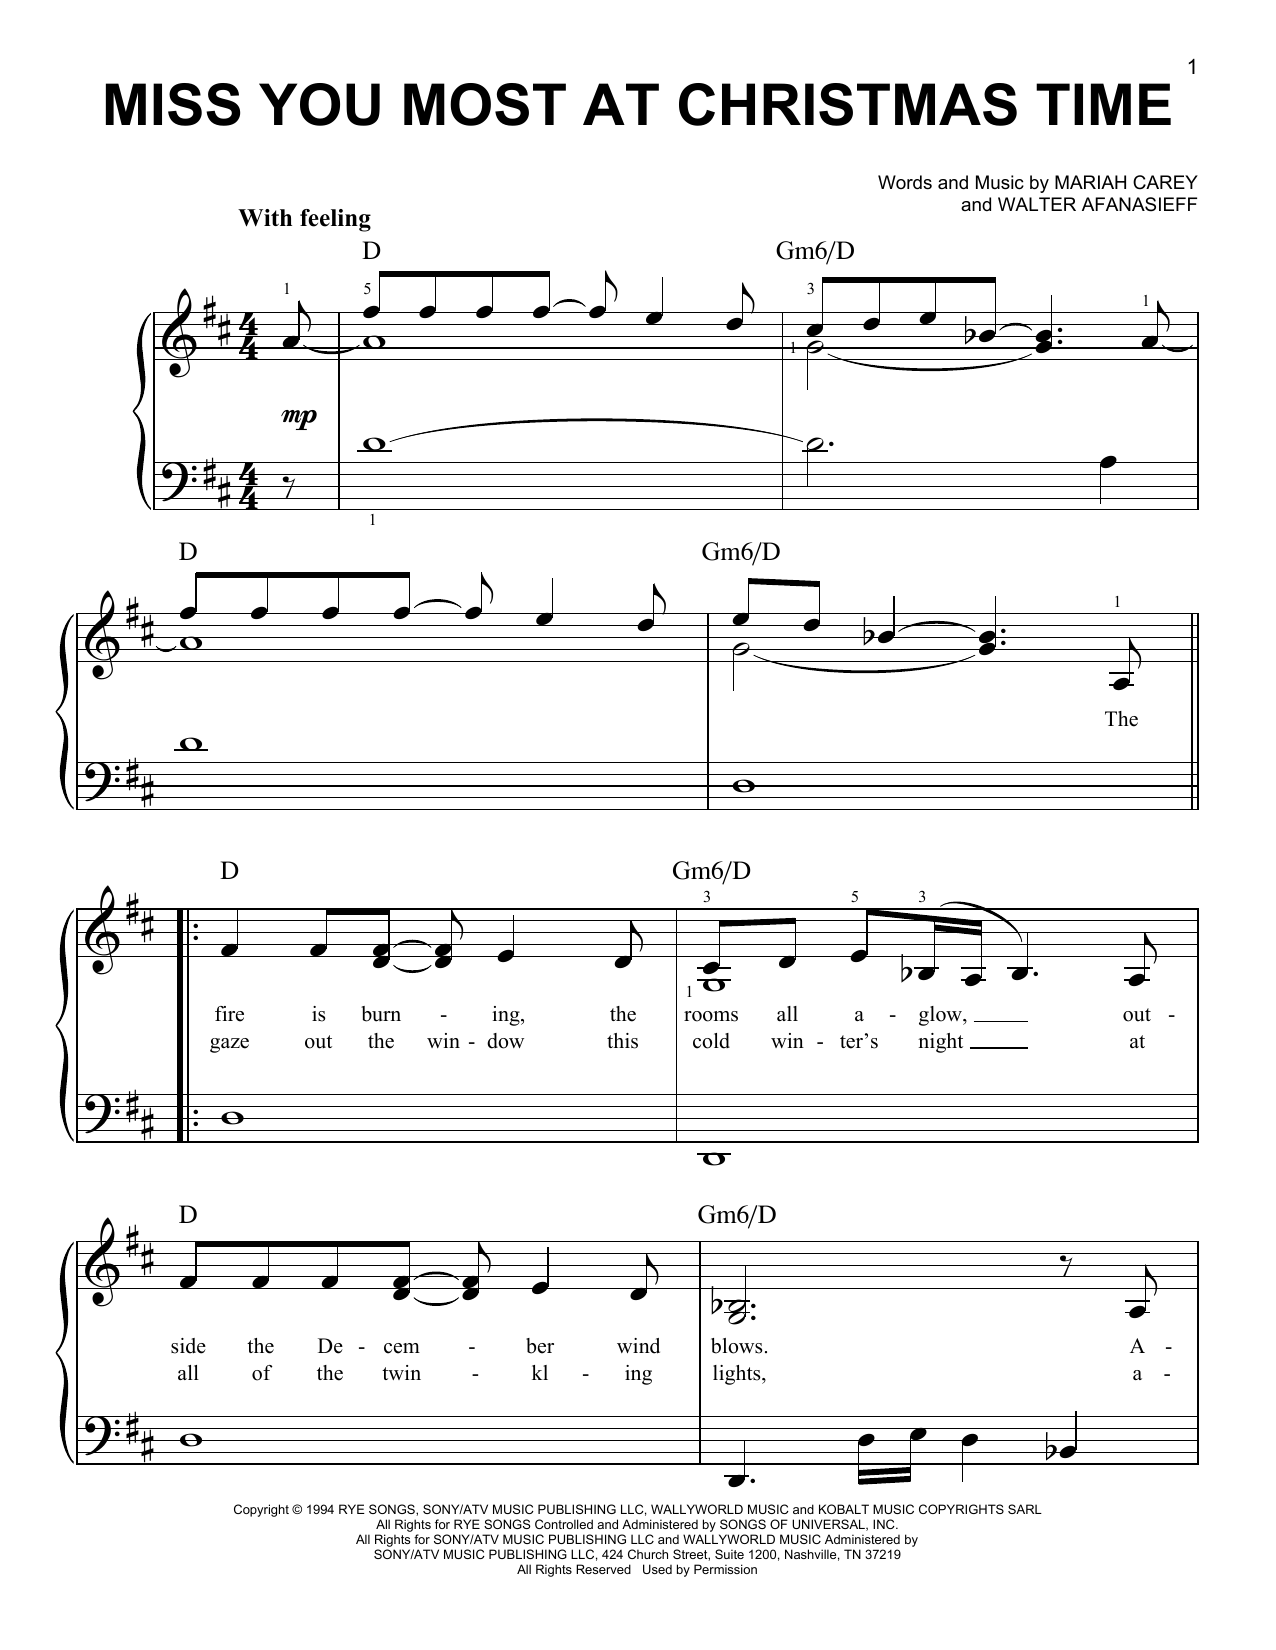 Mariah Carey Miss You Most At Christmas Time sheet music notes and chords. Download Printable PDF.